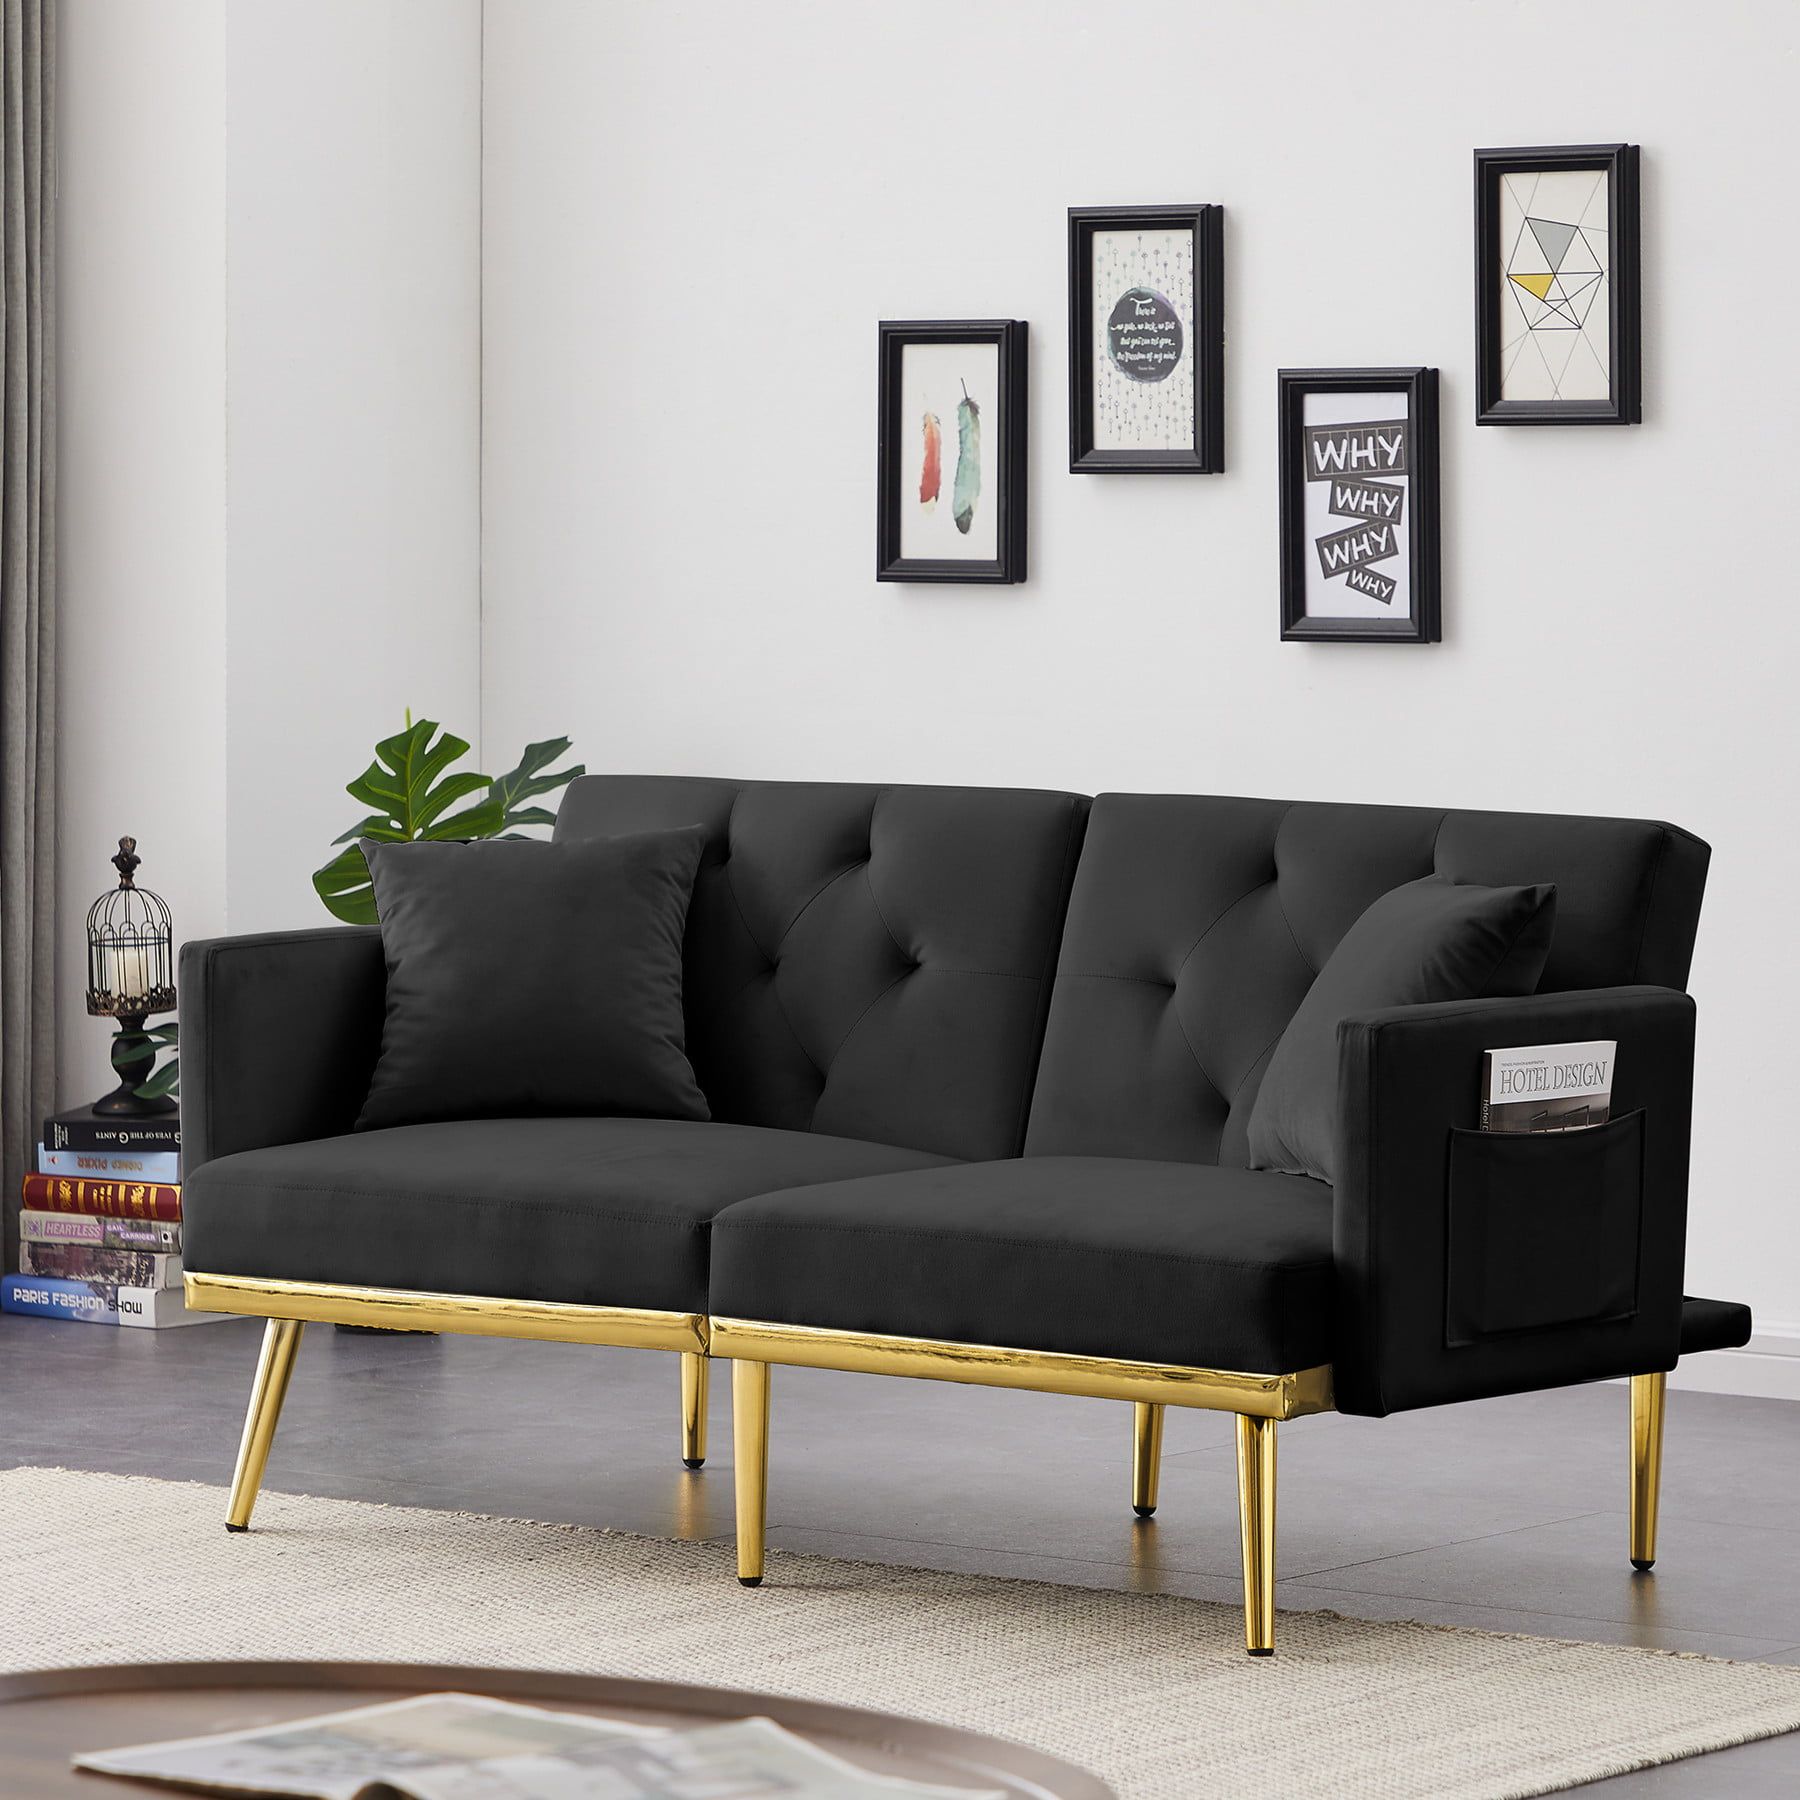 Futon Sofa Bed With 2 Pillows, 59" Modern Velvet Upholstered Convertible Sleeper  Sofa Loveseat Couch With Adjustable Backrest & Golden Metal Legs For Living  Room Bedroom Small Space, Green – Walmart Intended For 2 Seater Black Velvet Sofa Beds (View 4 of 15)